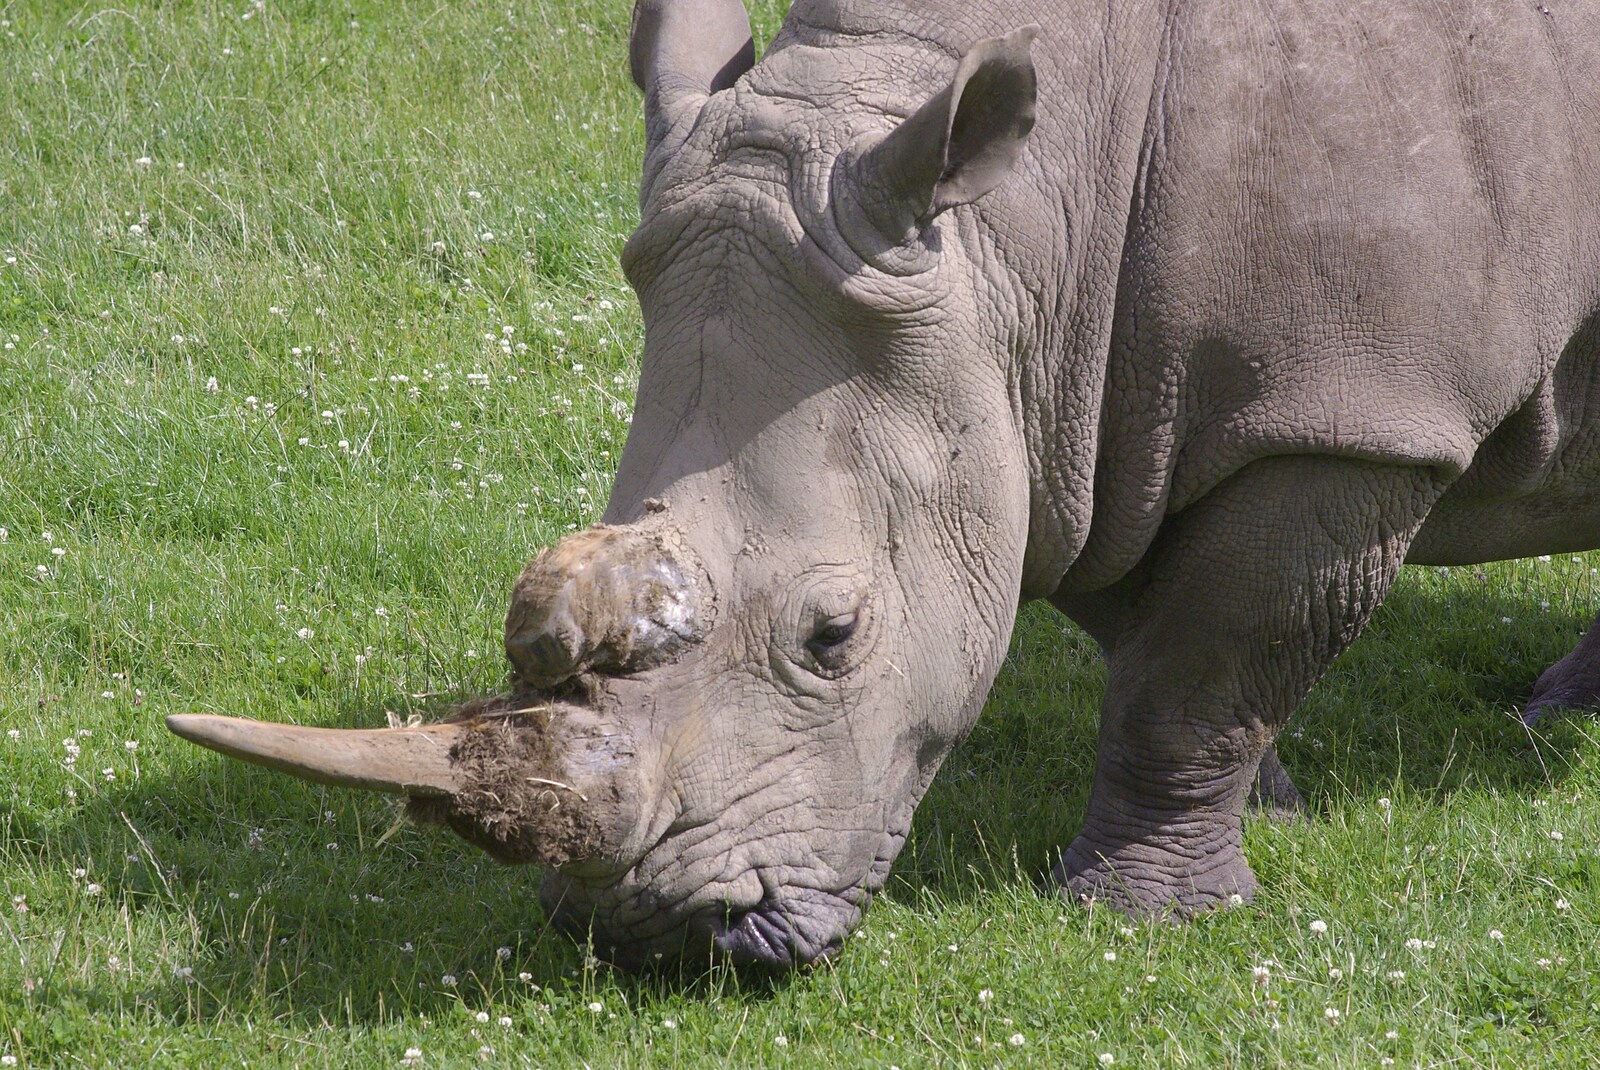 A White Rhino from The BBs in a Garden, and a Qualcomm Safari, Woburn, Bedfordshire - 22nd July 2007